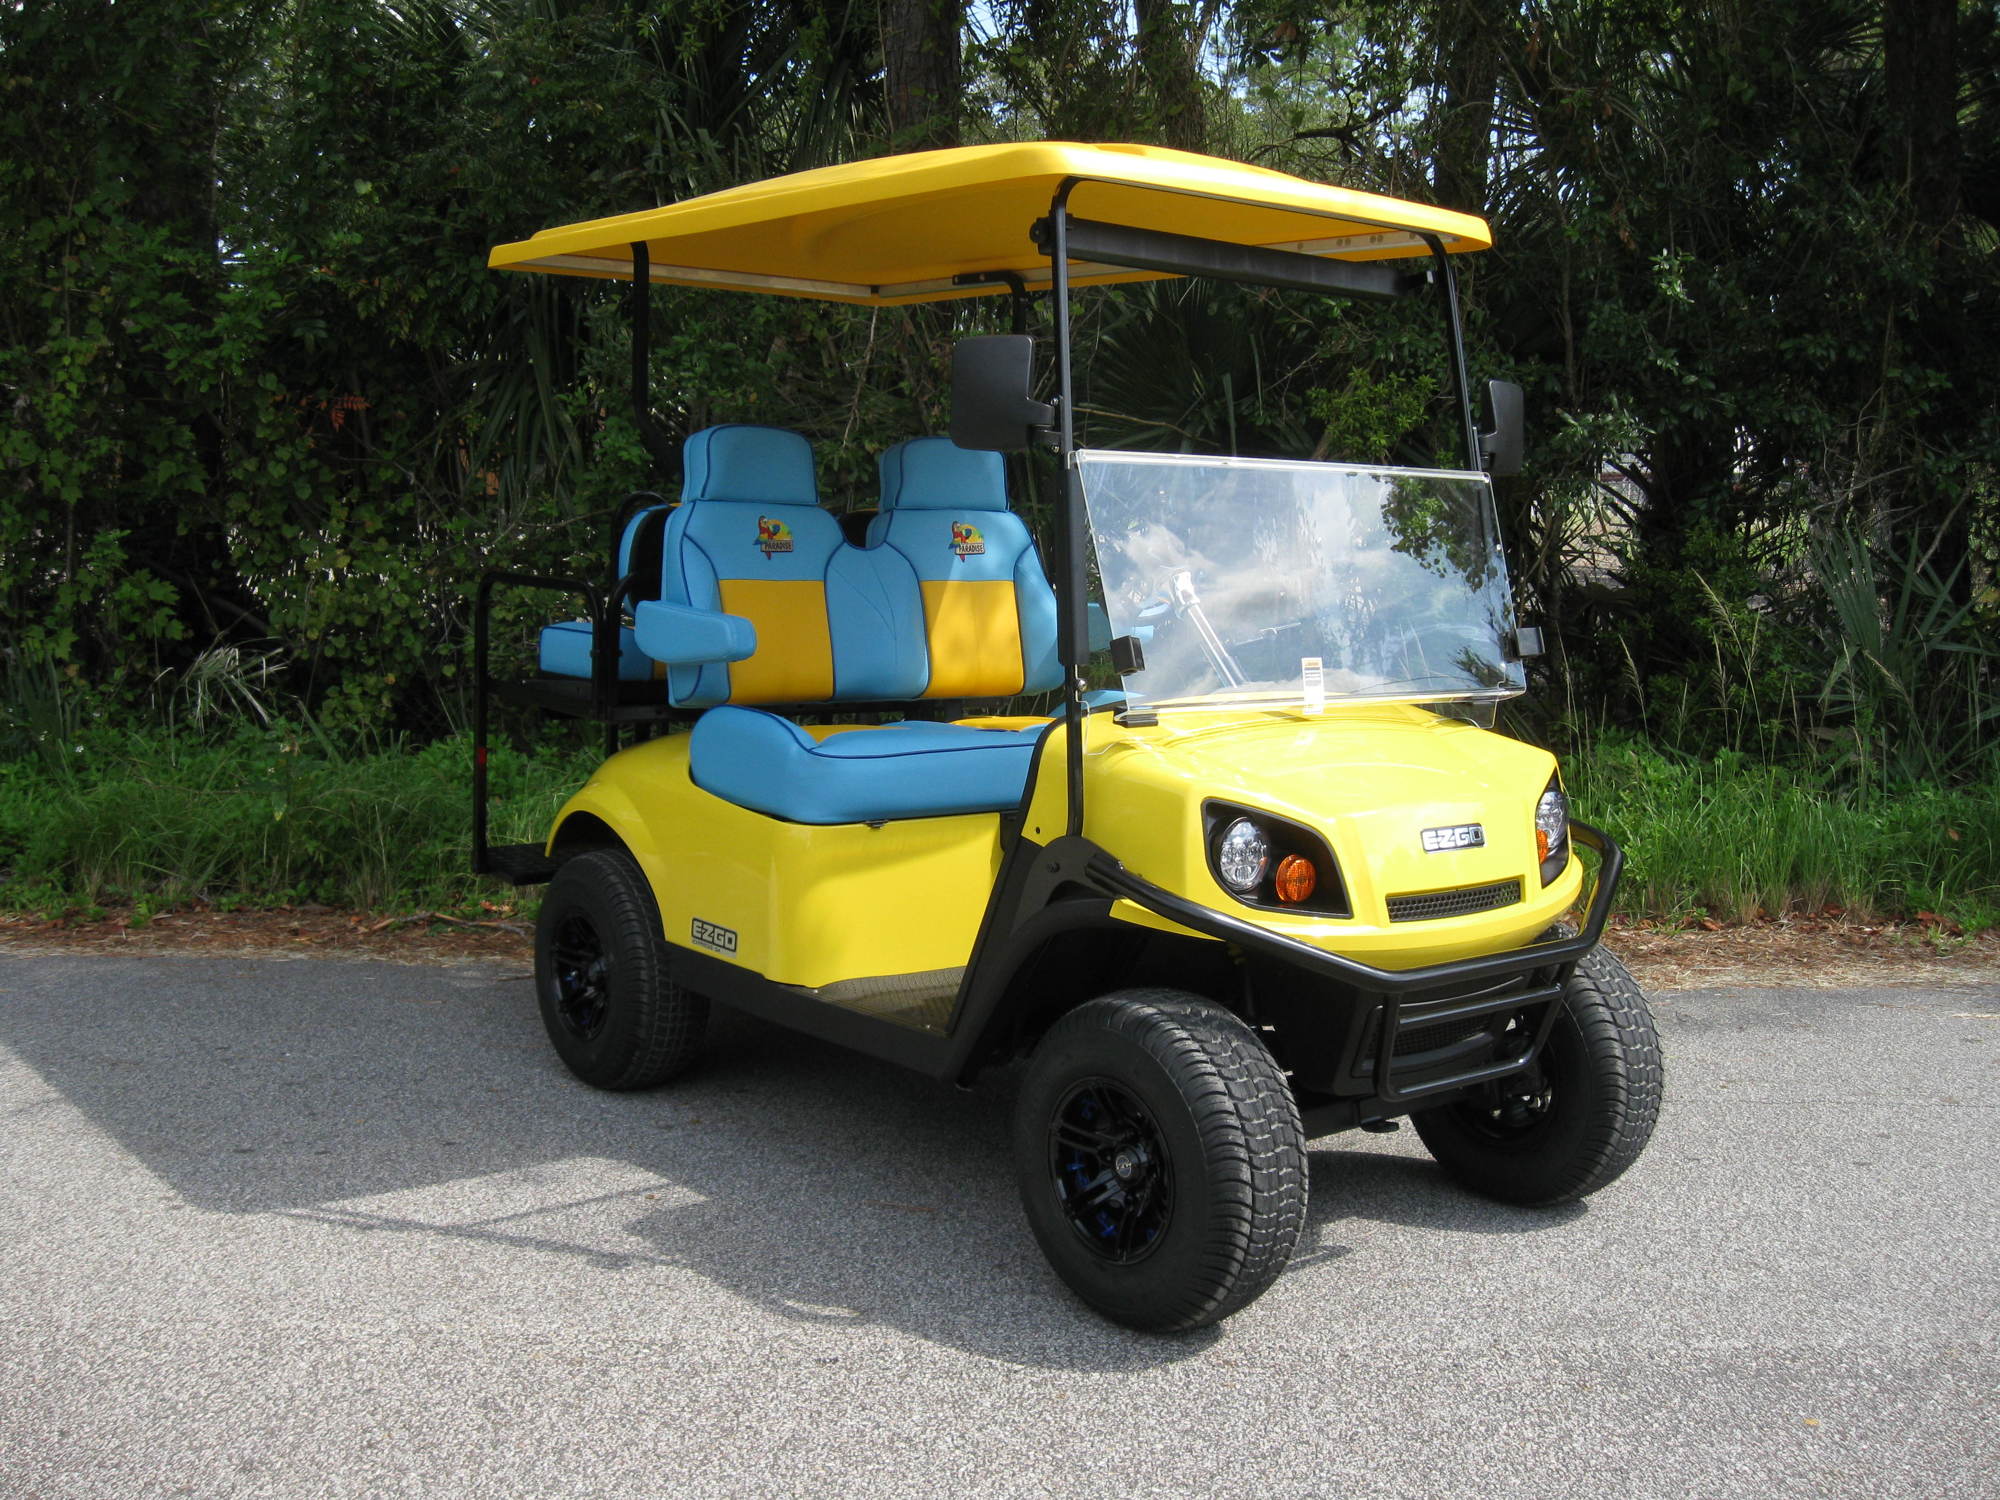 A wide array of options are available for golf cars at Tee Time Golf Cars. Courtesy photo